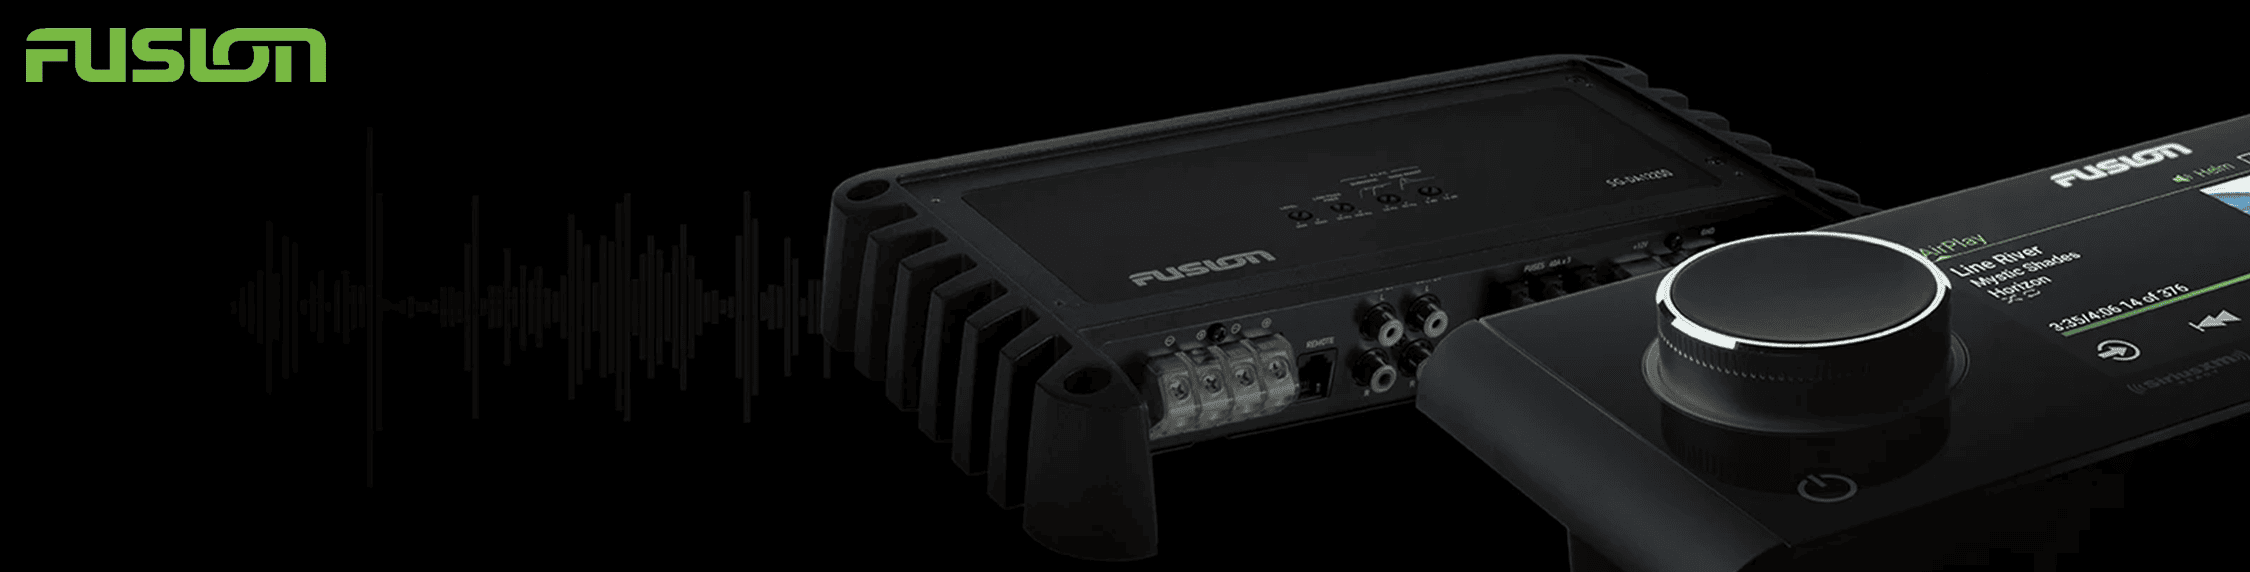 Fusion Marine Amplifiers